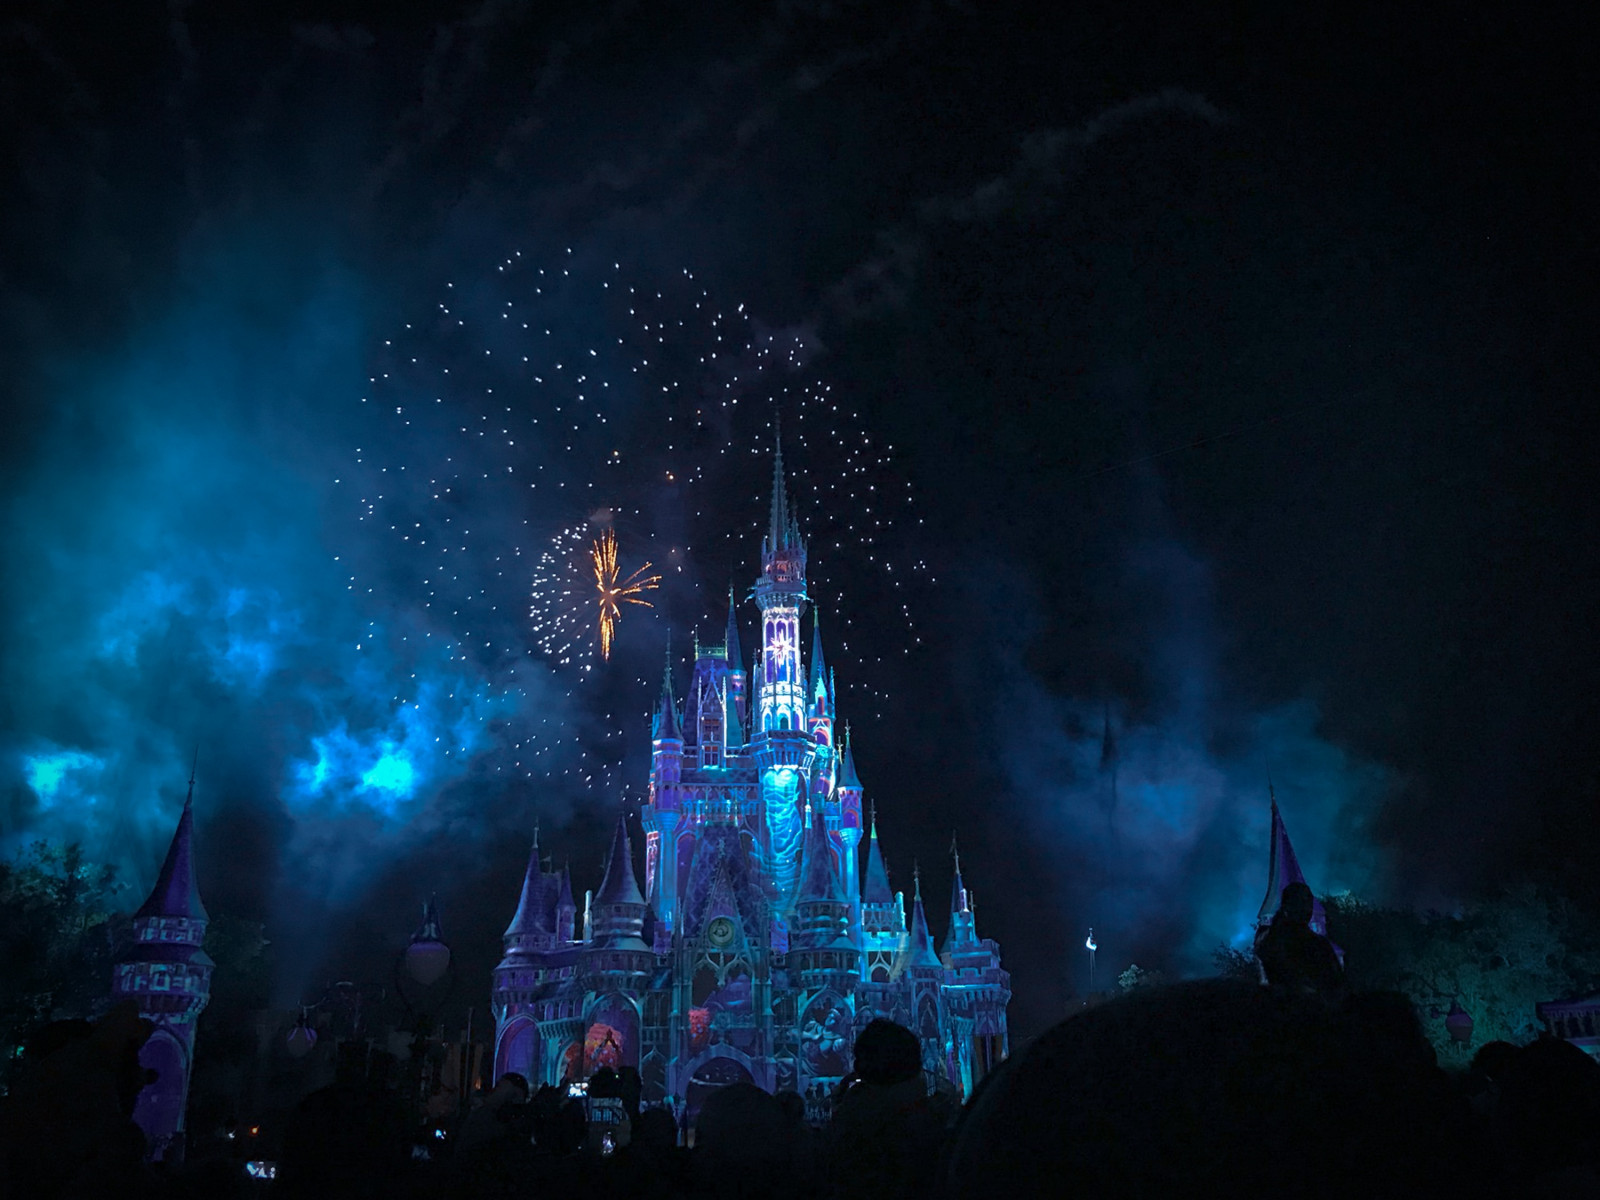 Disney investors focus on streaming, shouldn't forget theme parks